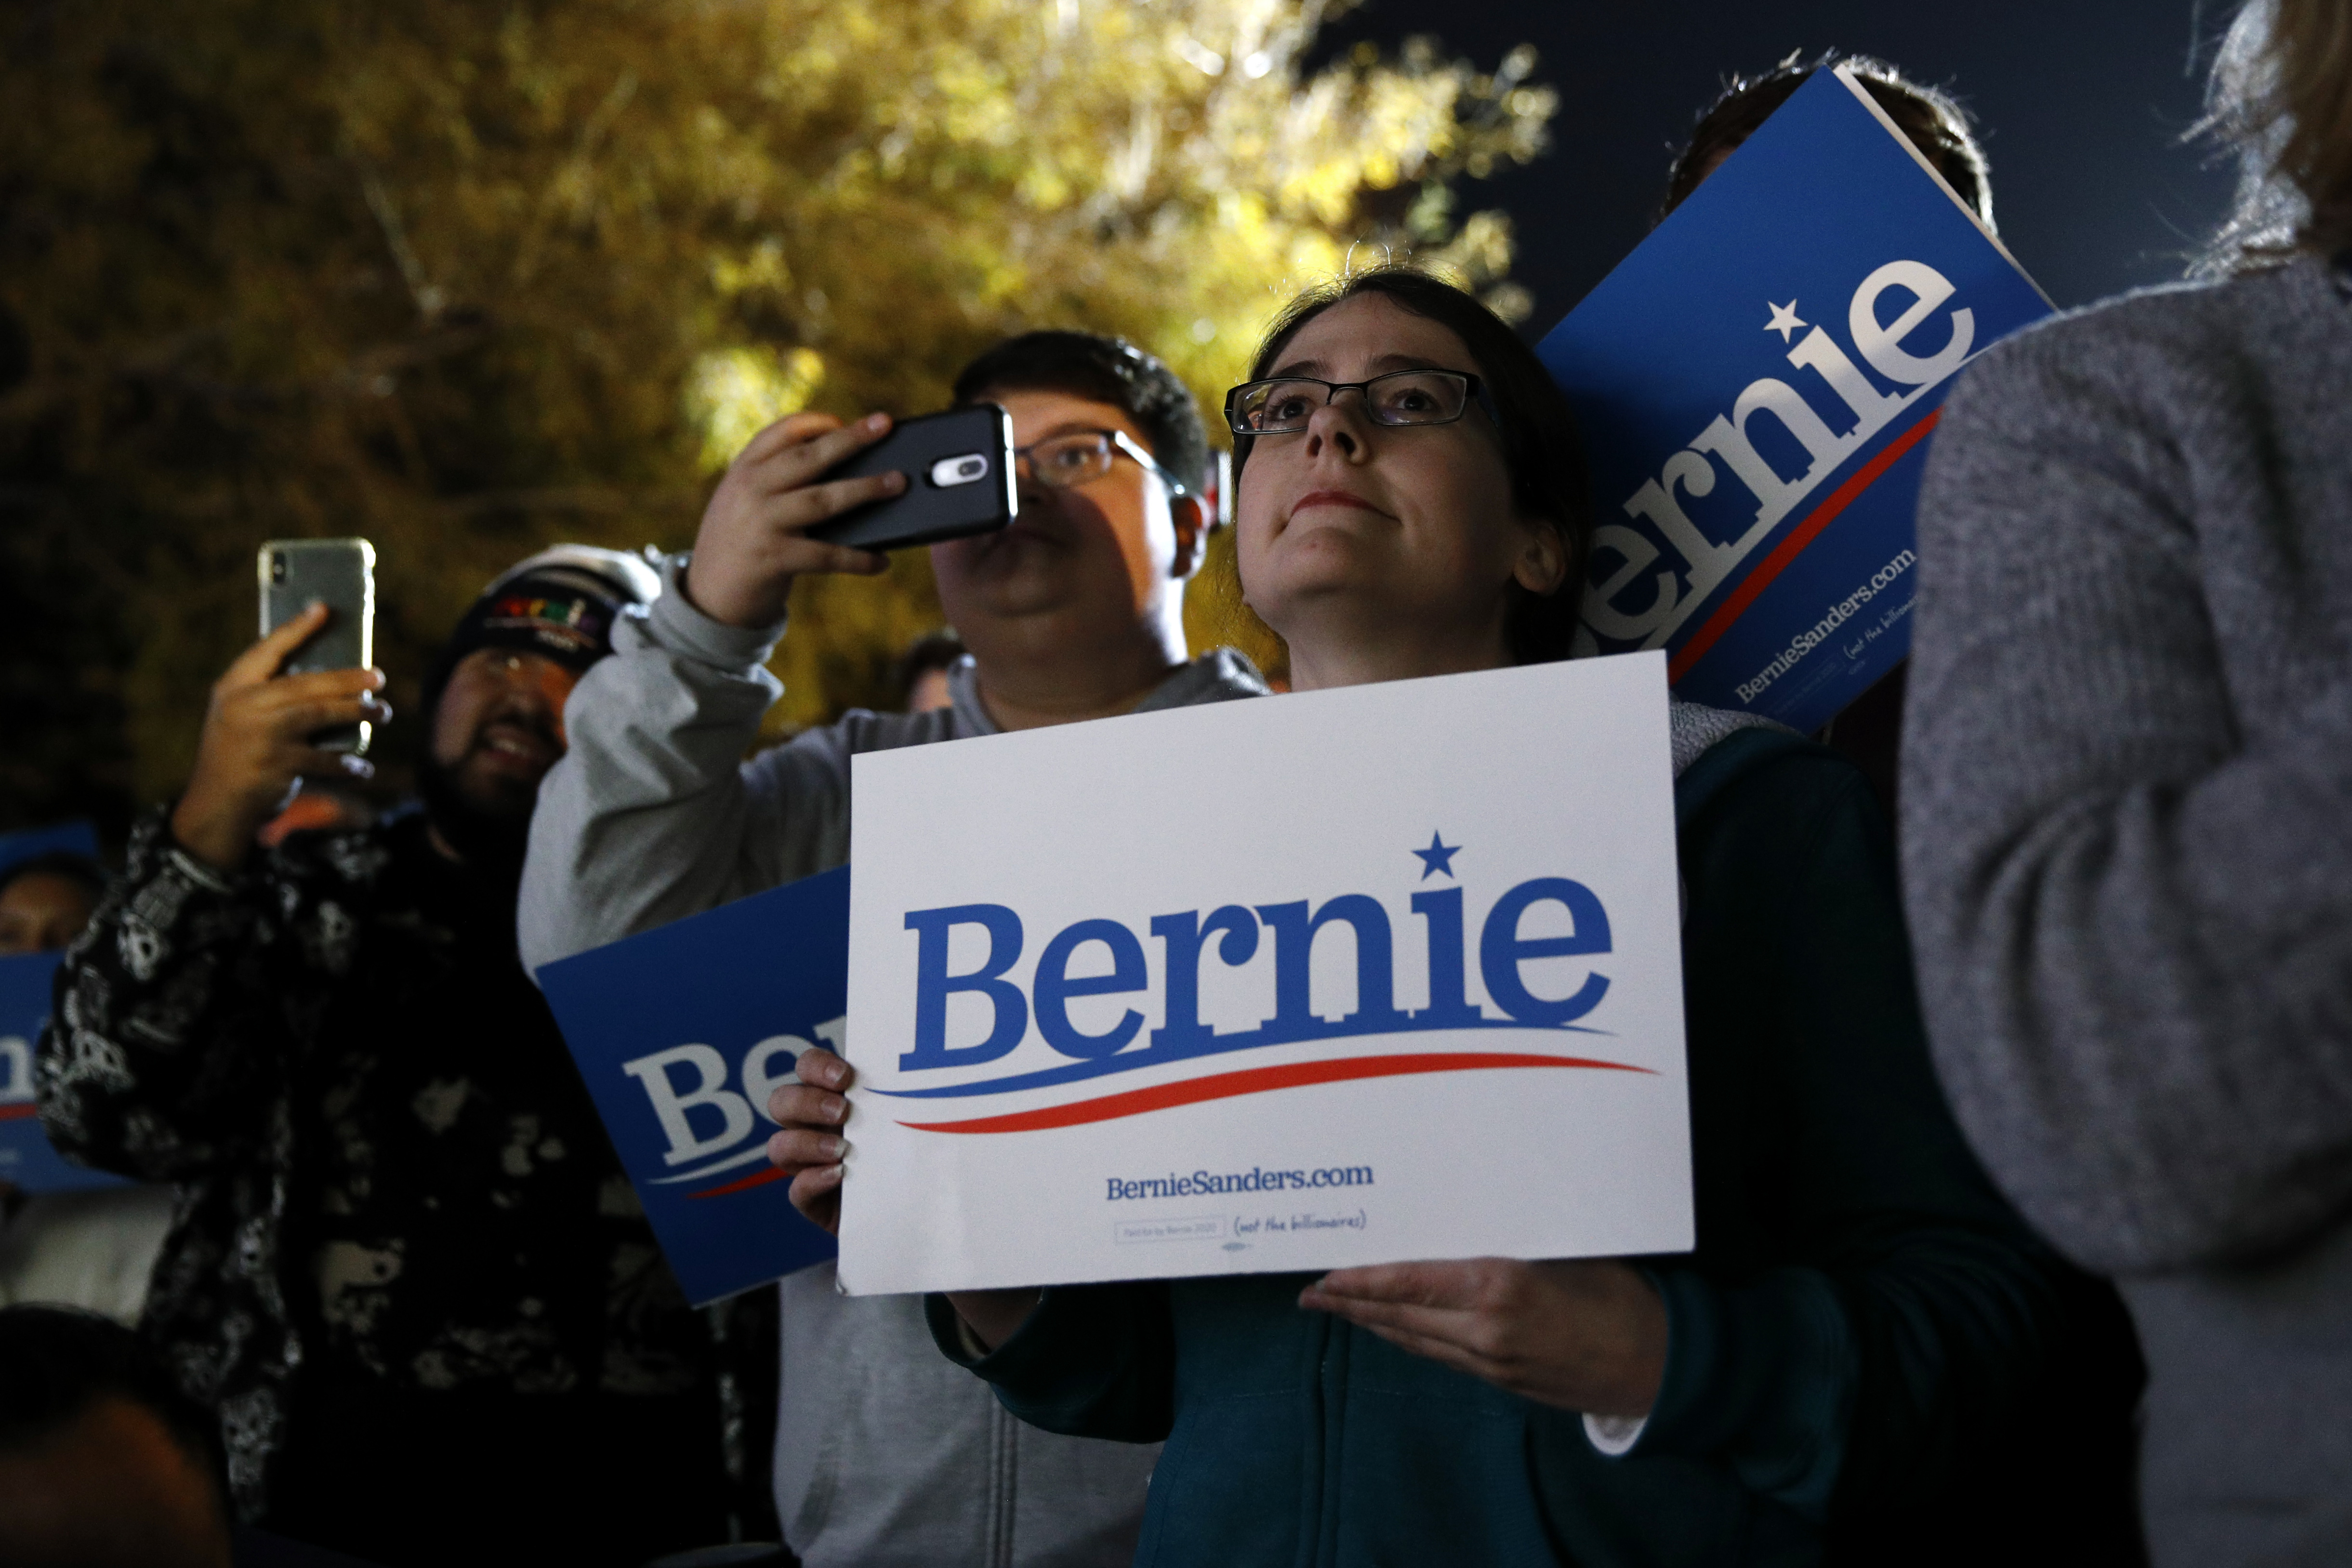 Attendees listen during a campaign event for Democratic presidential candidate Sen. Bernie Sanders, I-Vt., at Springs Preserve in Las Vegas, Friday, Feb. 21, 2020. (AP Photo/Patrick Semansky)